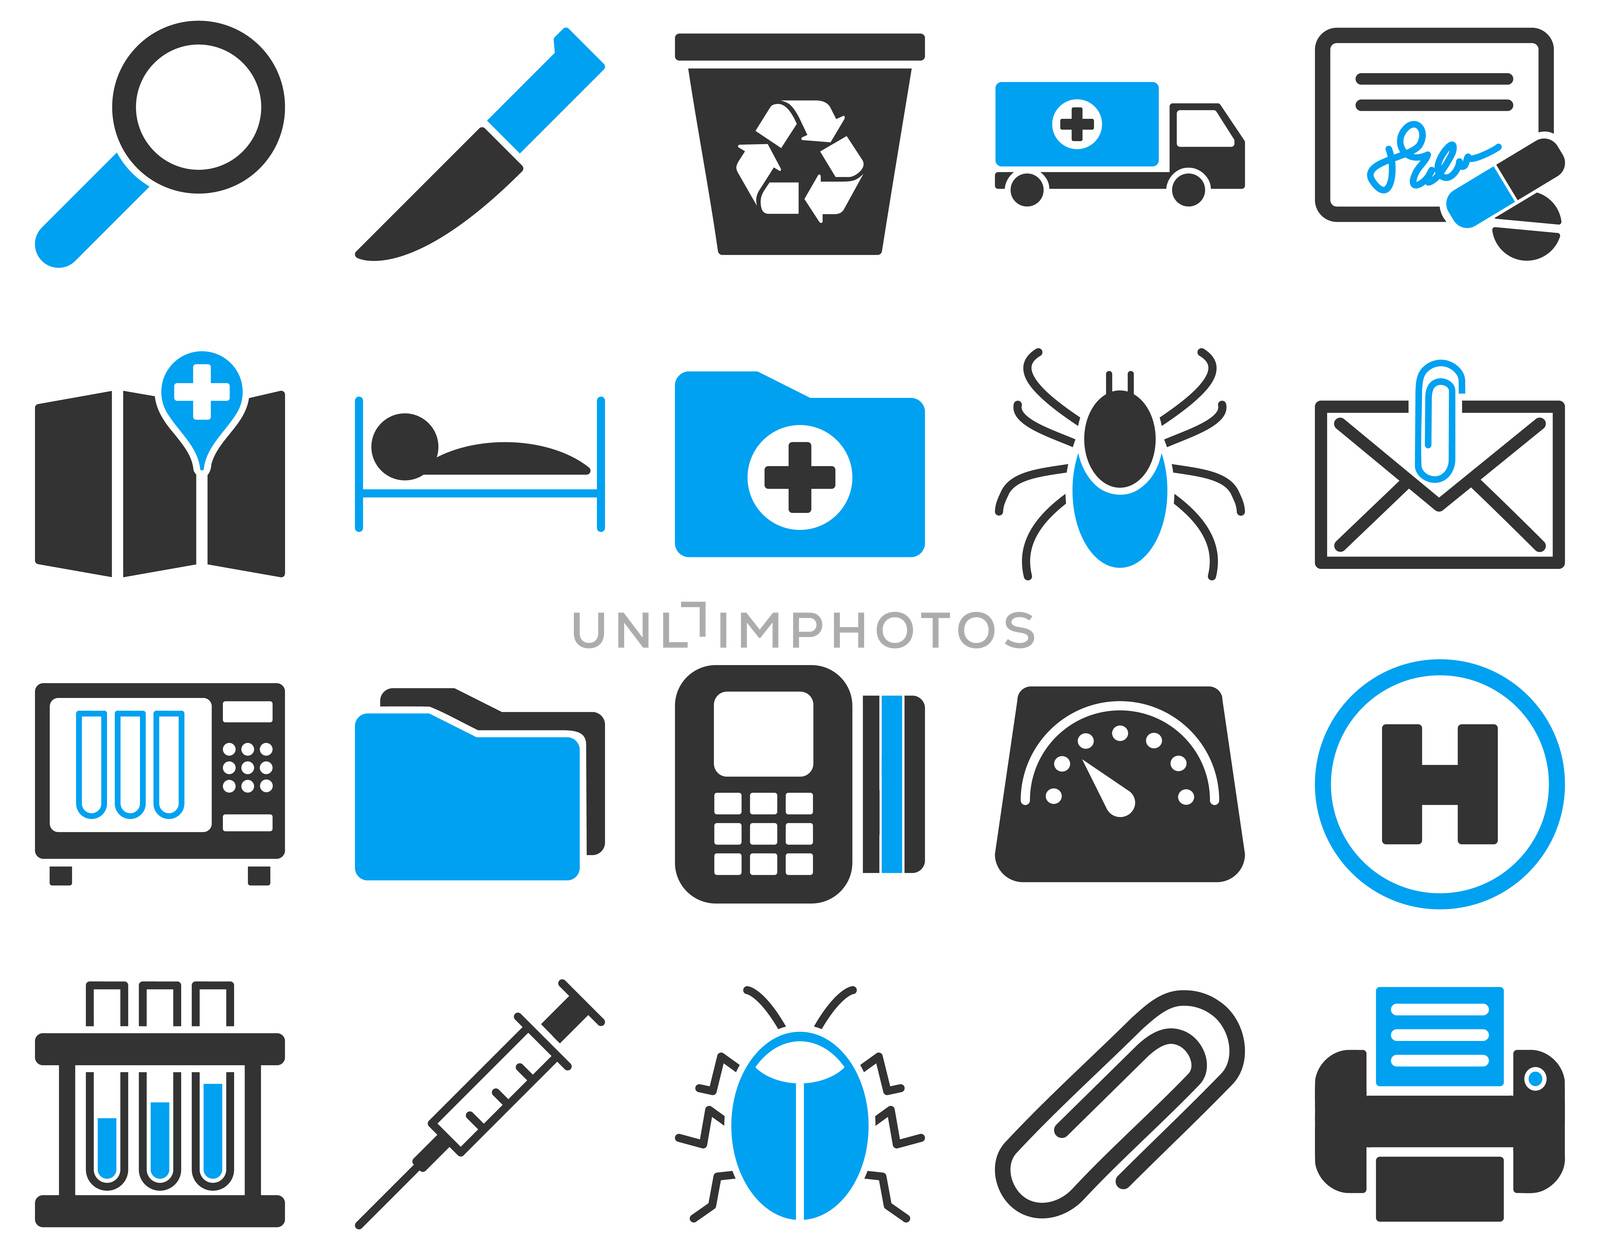 Medical icon set. Style: bicolor icons drawn with blue and gray colors on a white background.